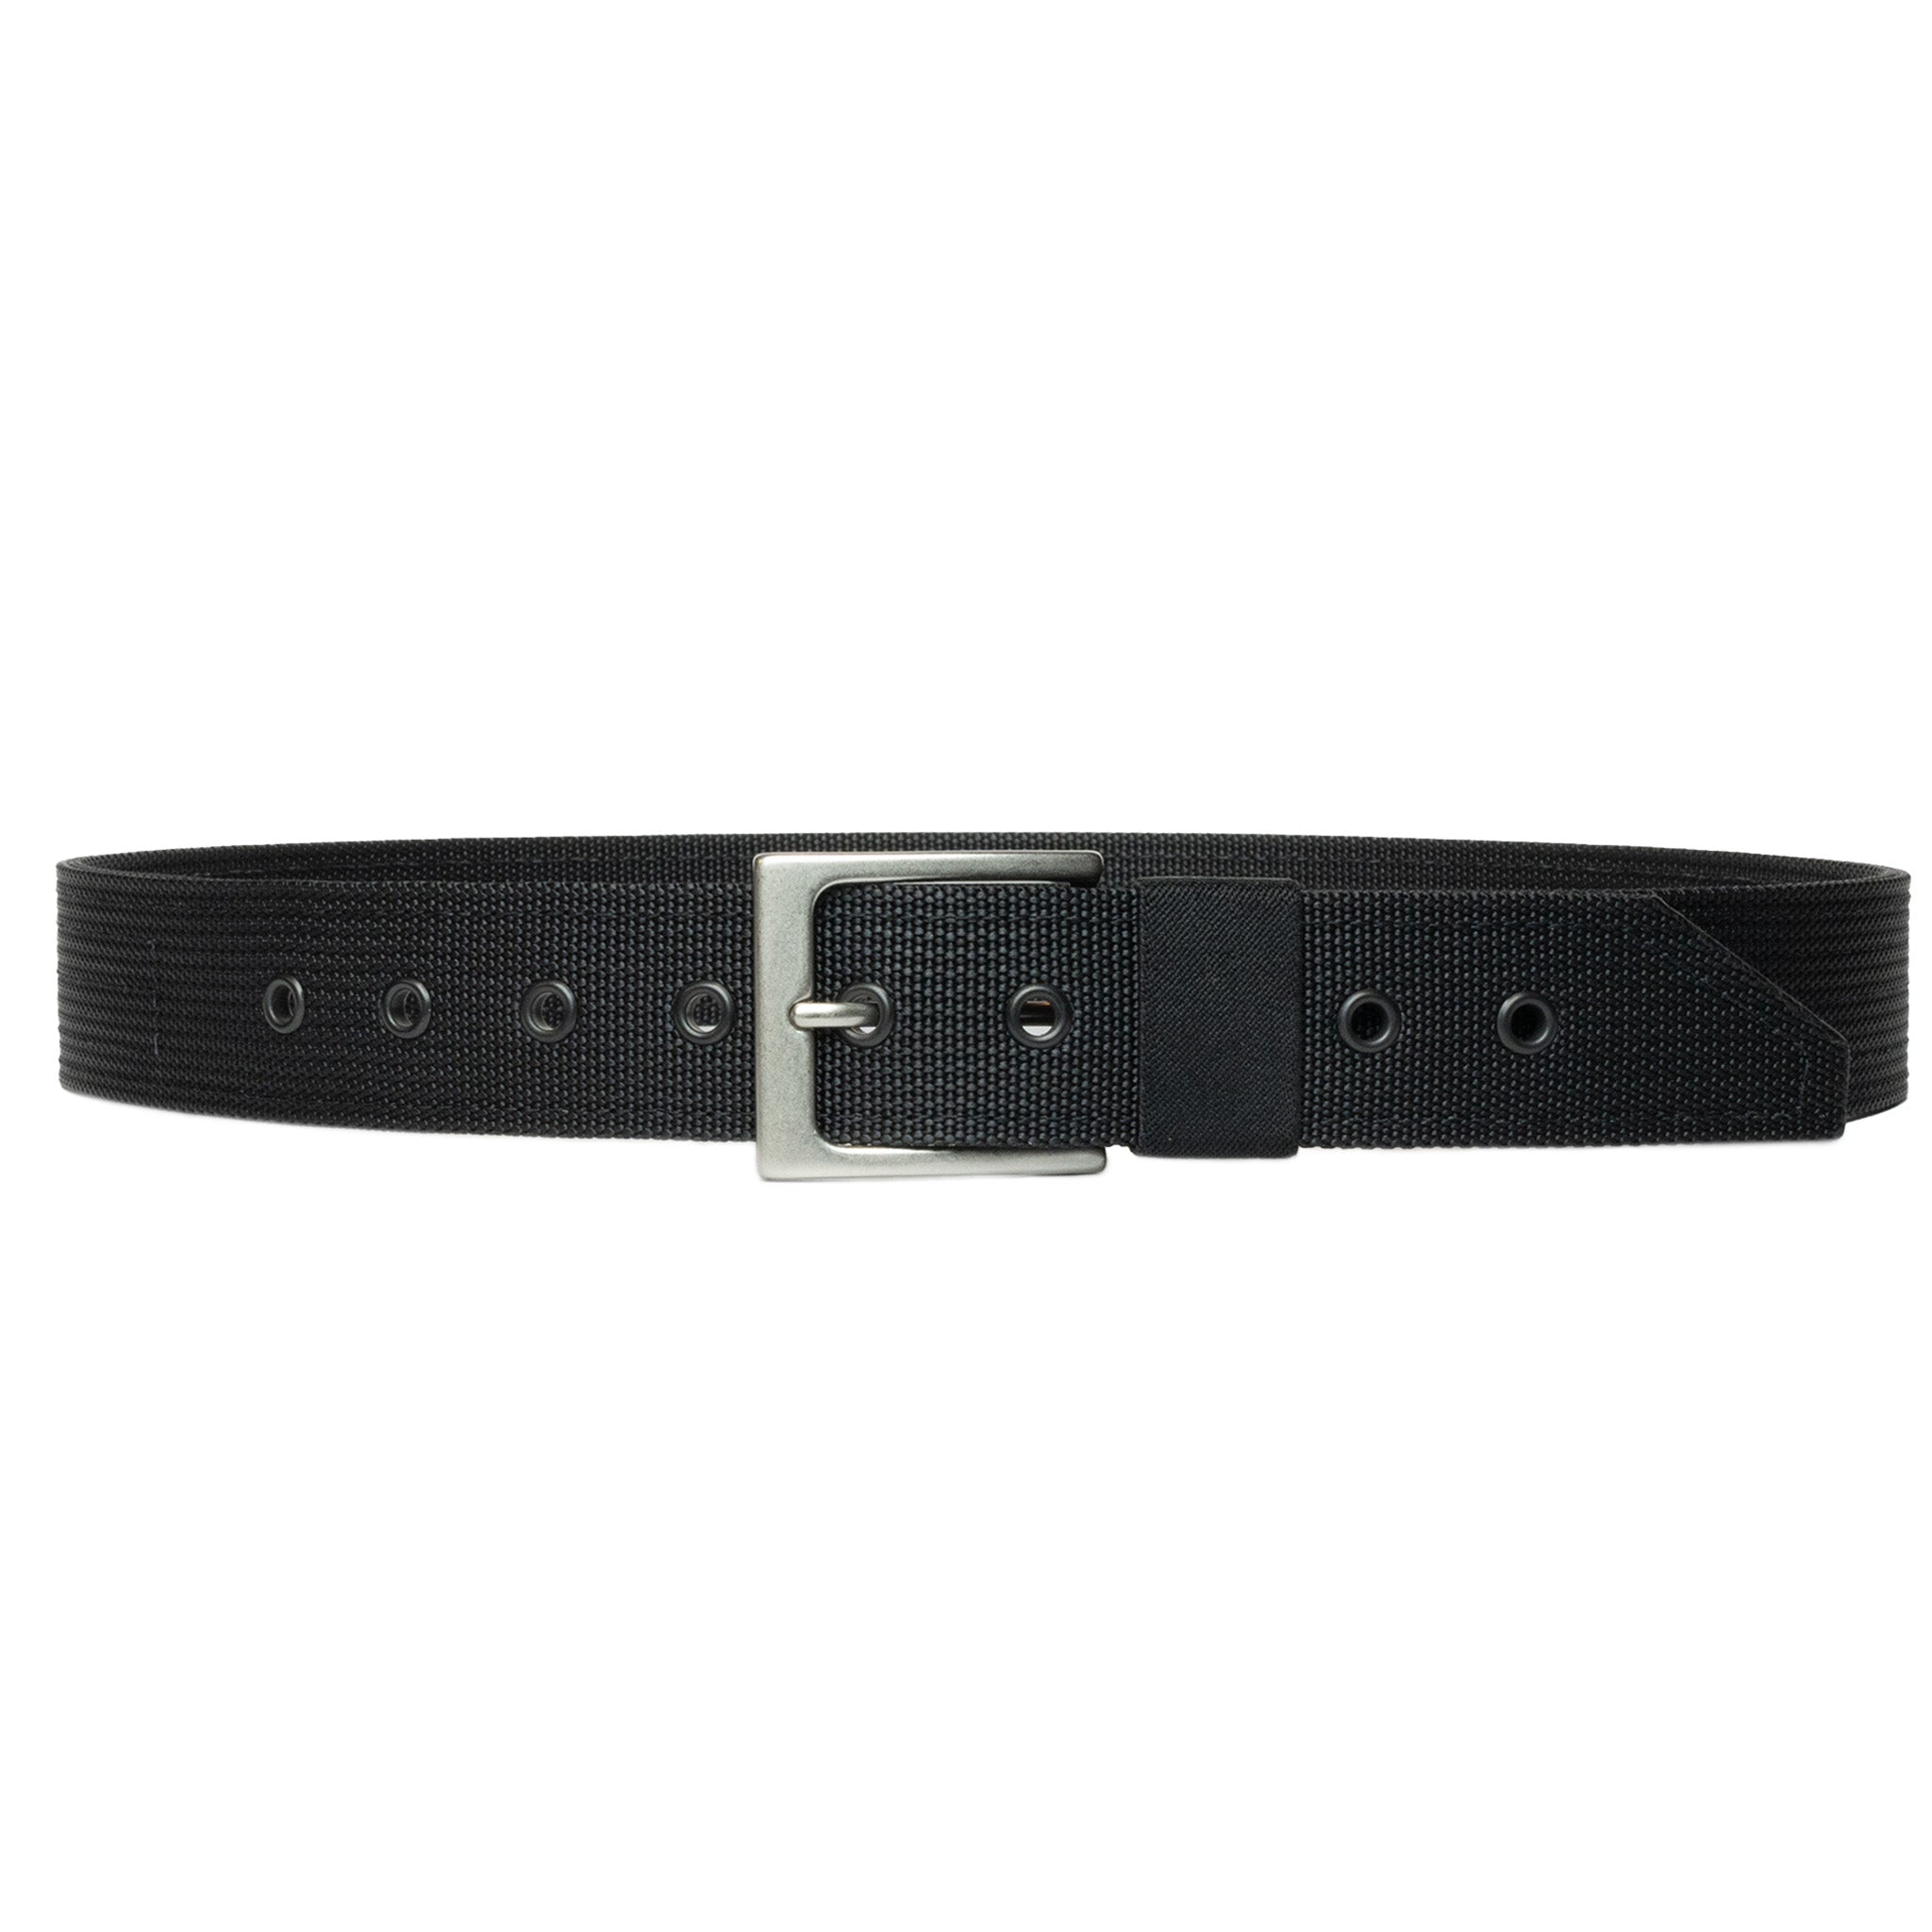 Emissary EDC Belt in Black with Silver Buckle